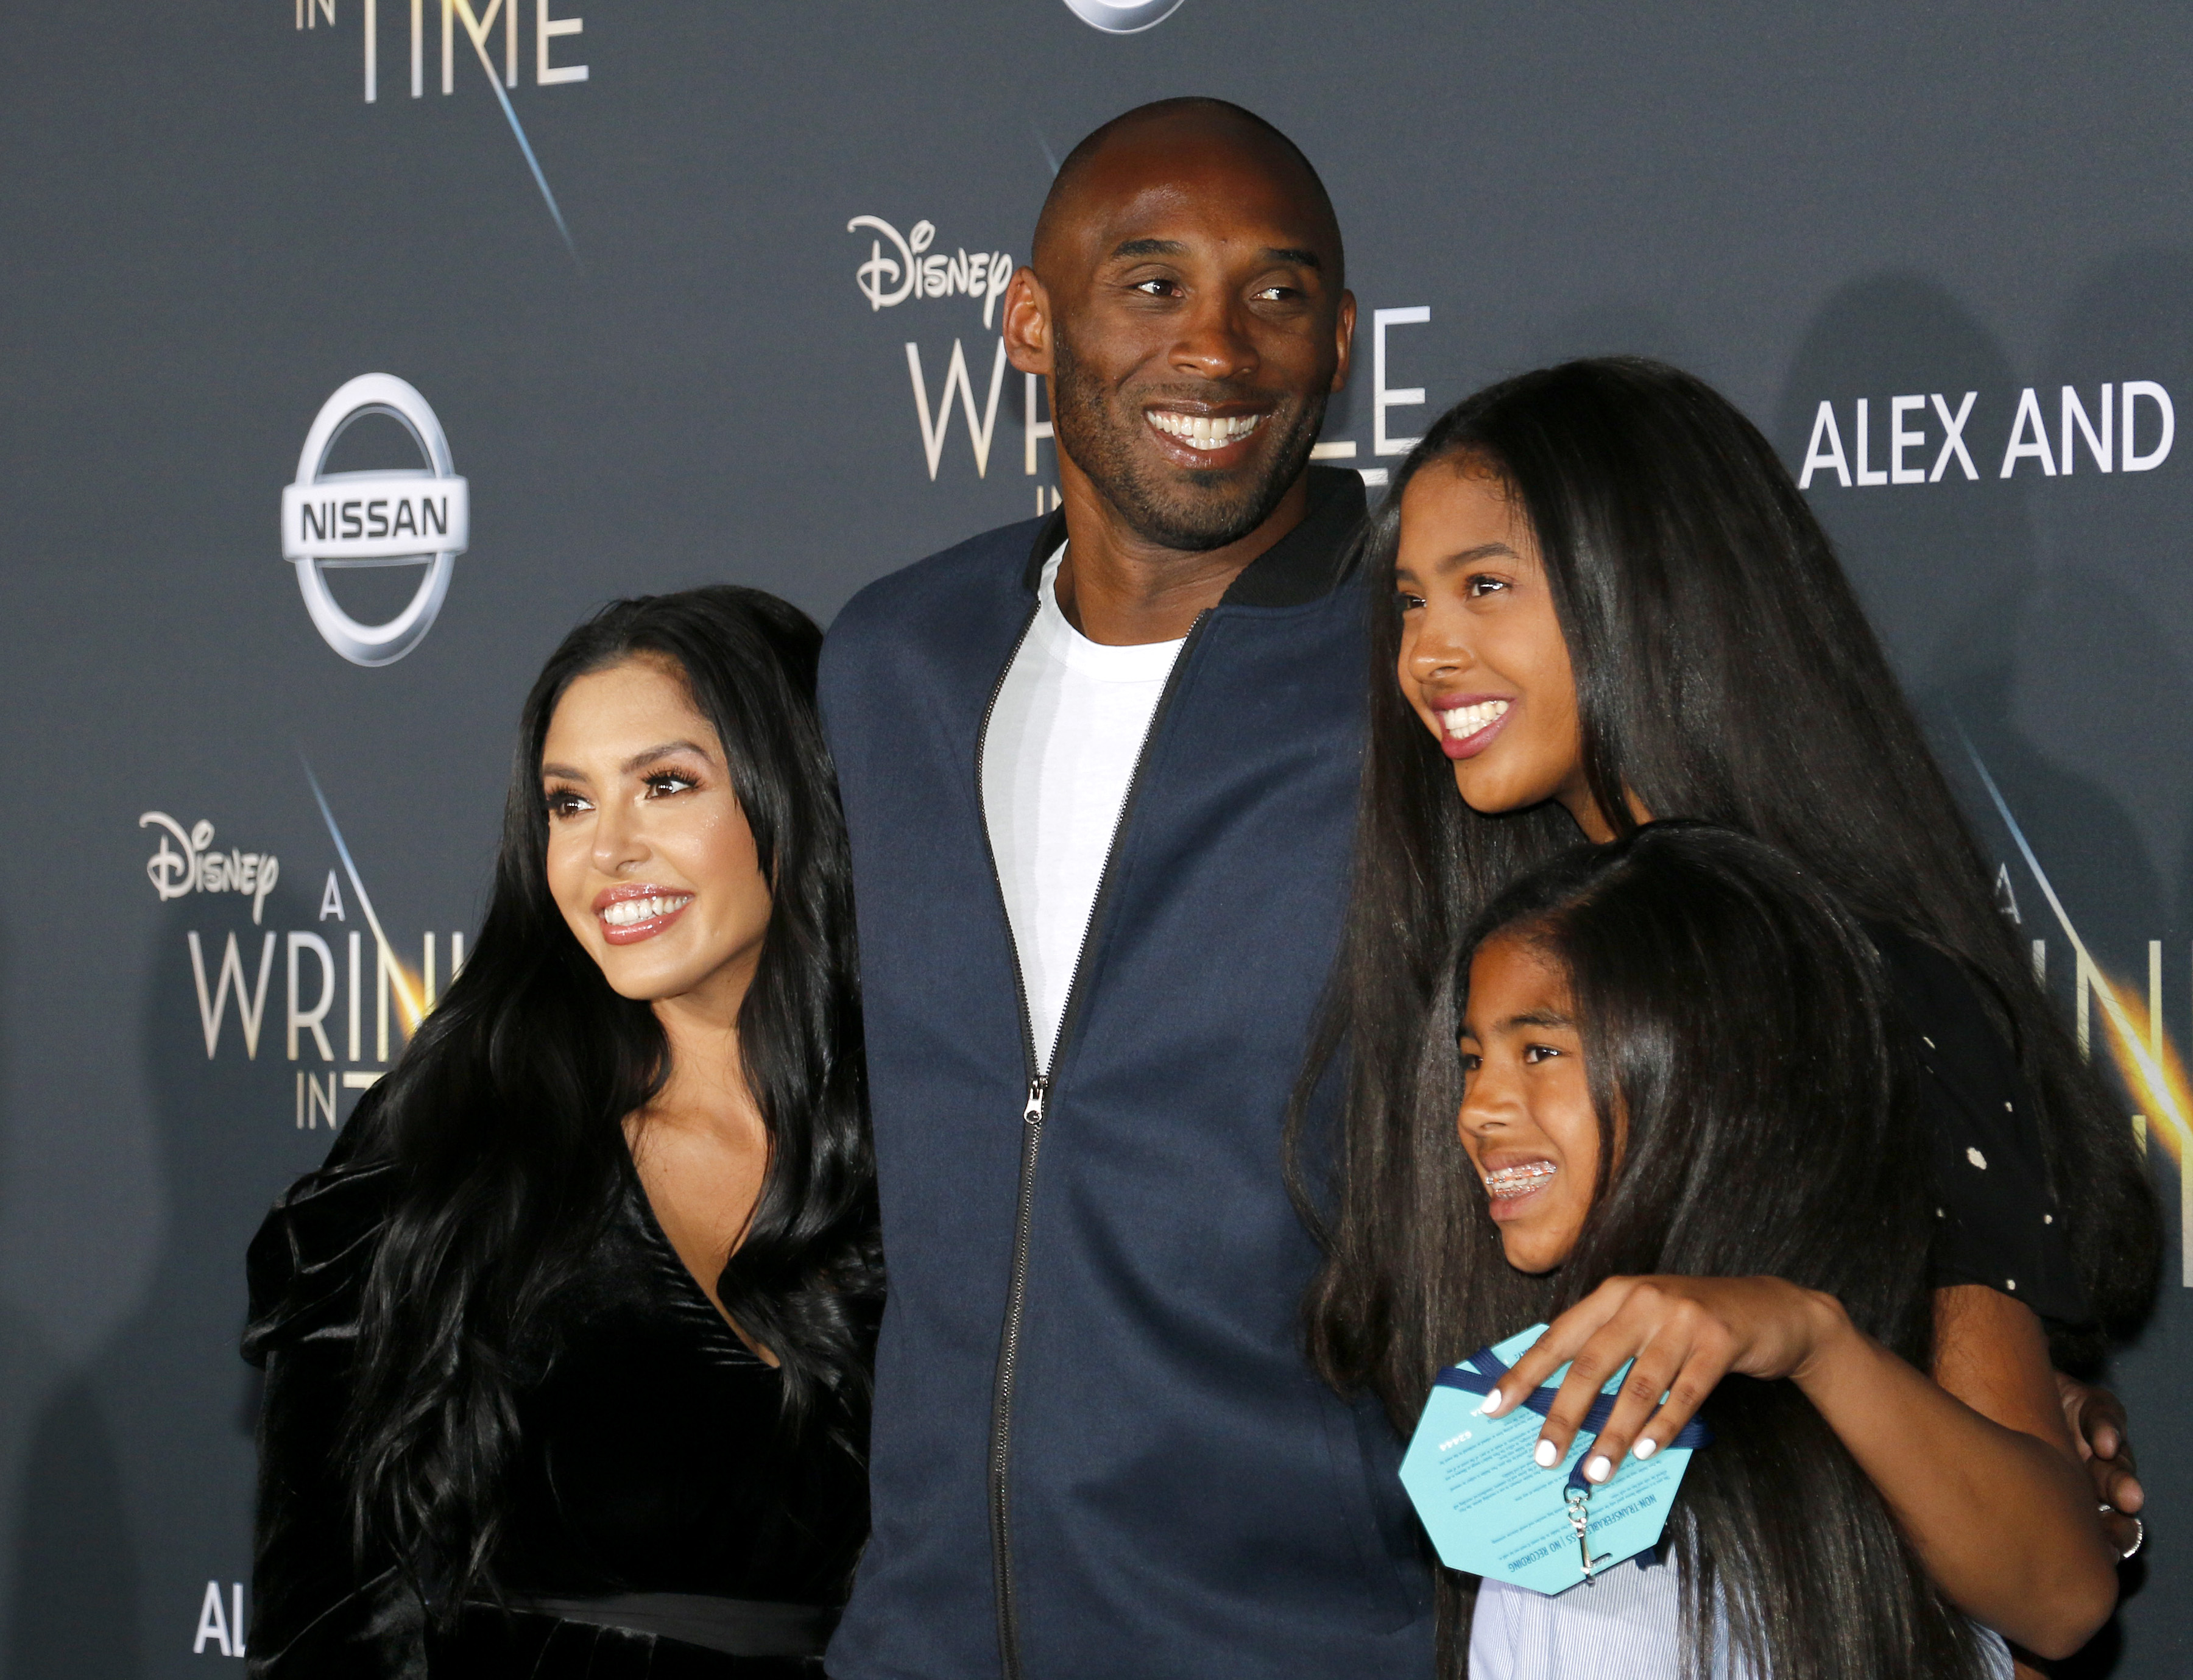 Kobe Bryant, Vanessa Bryant, Gianna Maria Onore Bryant and Natalia Diamante Bryant at the Los Angeles premiere of &apos;A Wrinkle In Time&apos; held at the El Capitan Theater in Hollywood, USA on February 26, 2018.